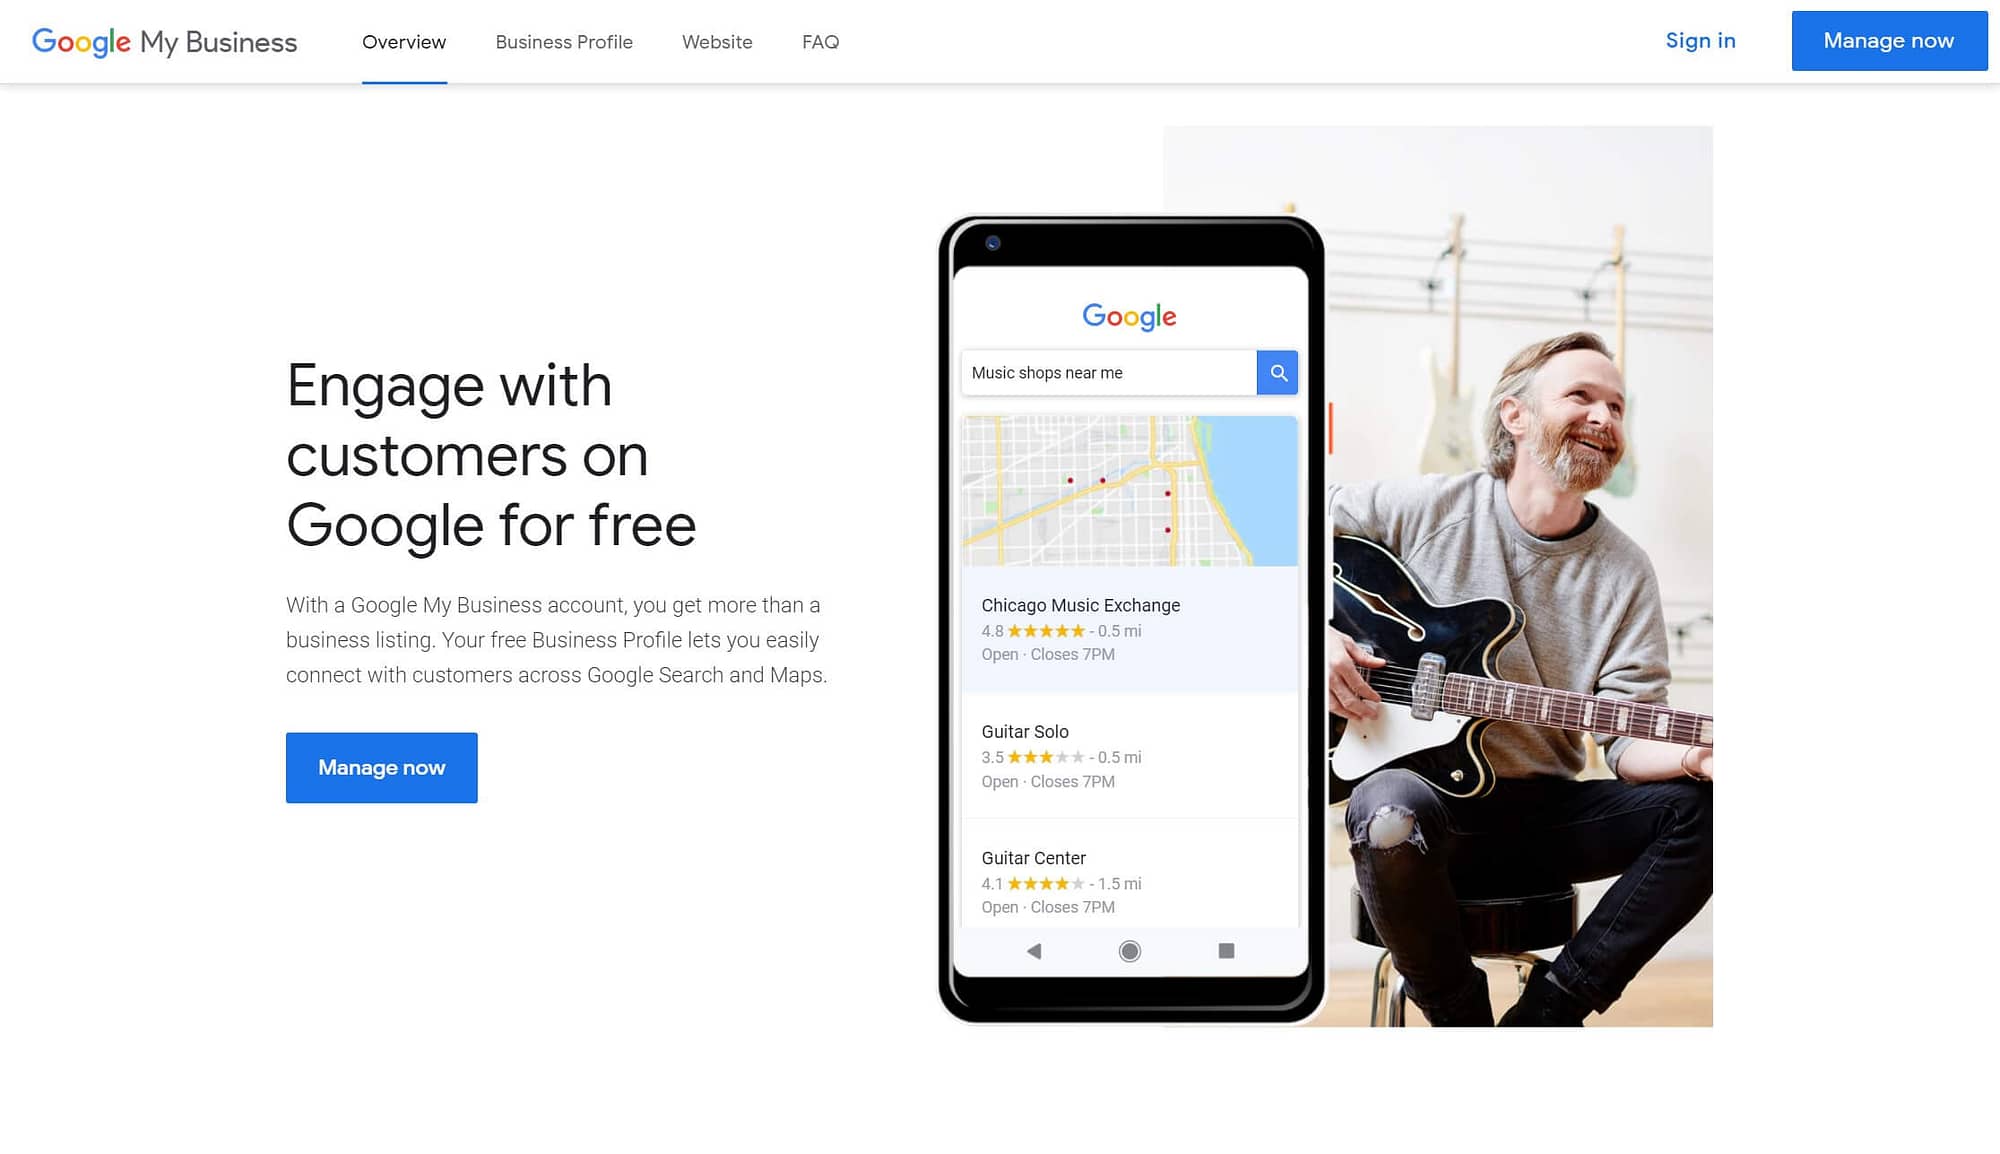 The Google Business home page.